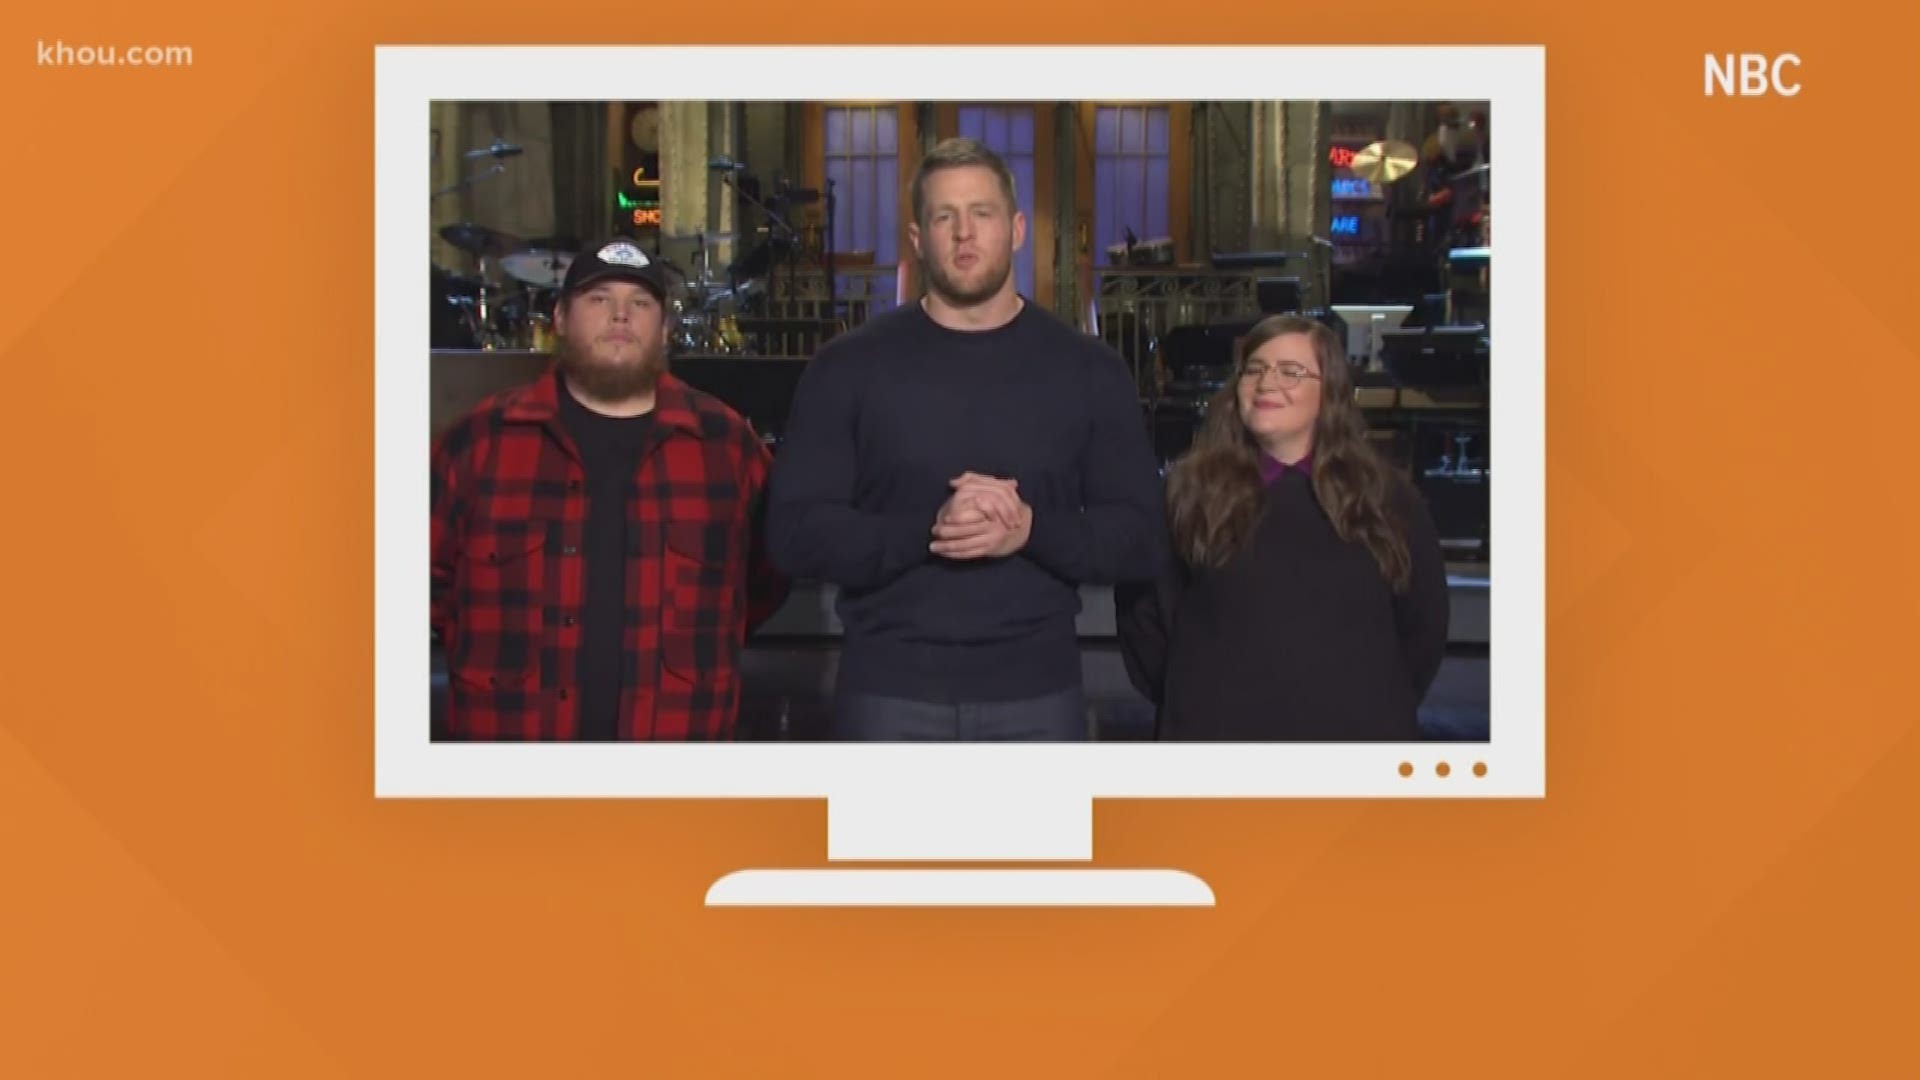 J.J. Watt is hosting Saturday Night Live and musical guest Luke Combs tweeted Thursday calling it surreal and promising J.J.'s funny and ya'll are in for a treat.